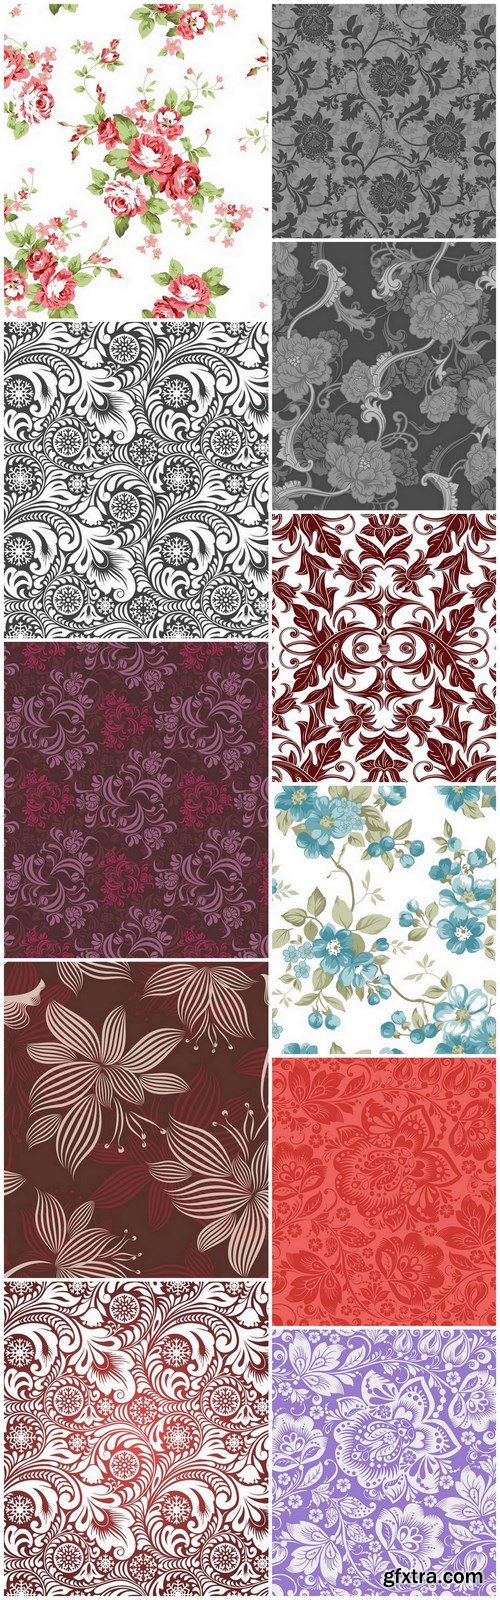 Floral Seamless Pattern - 11 EPS Vector Stock